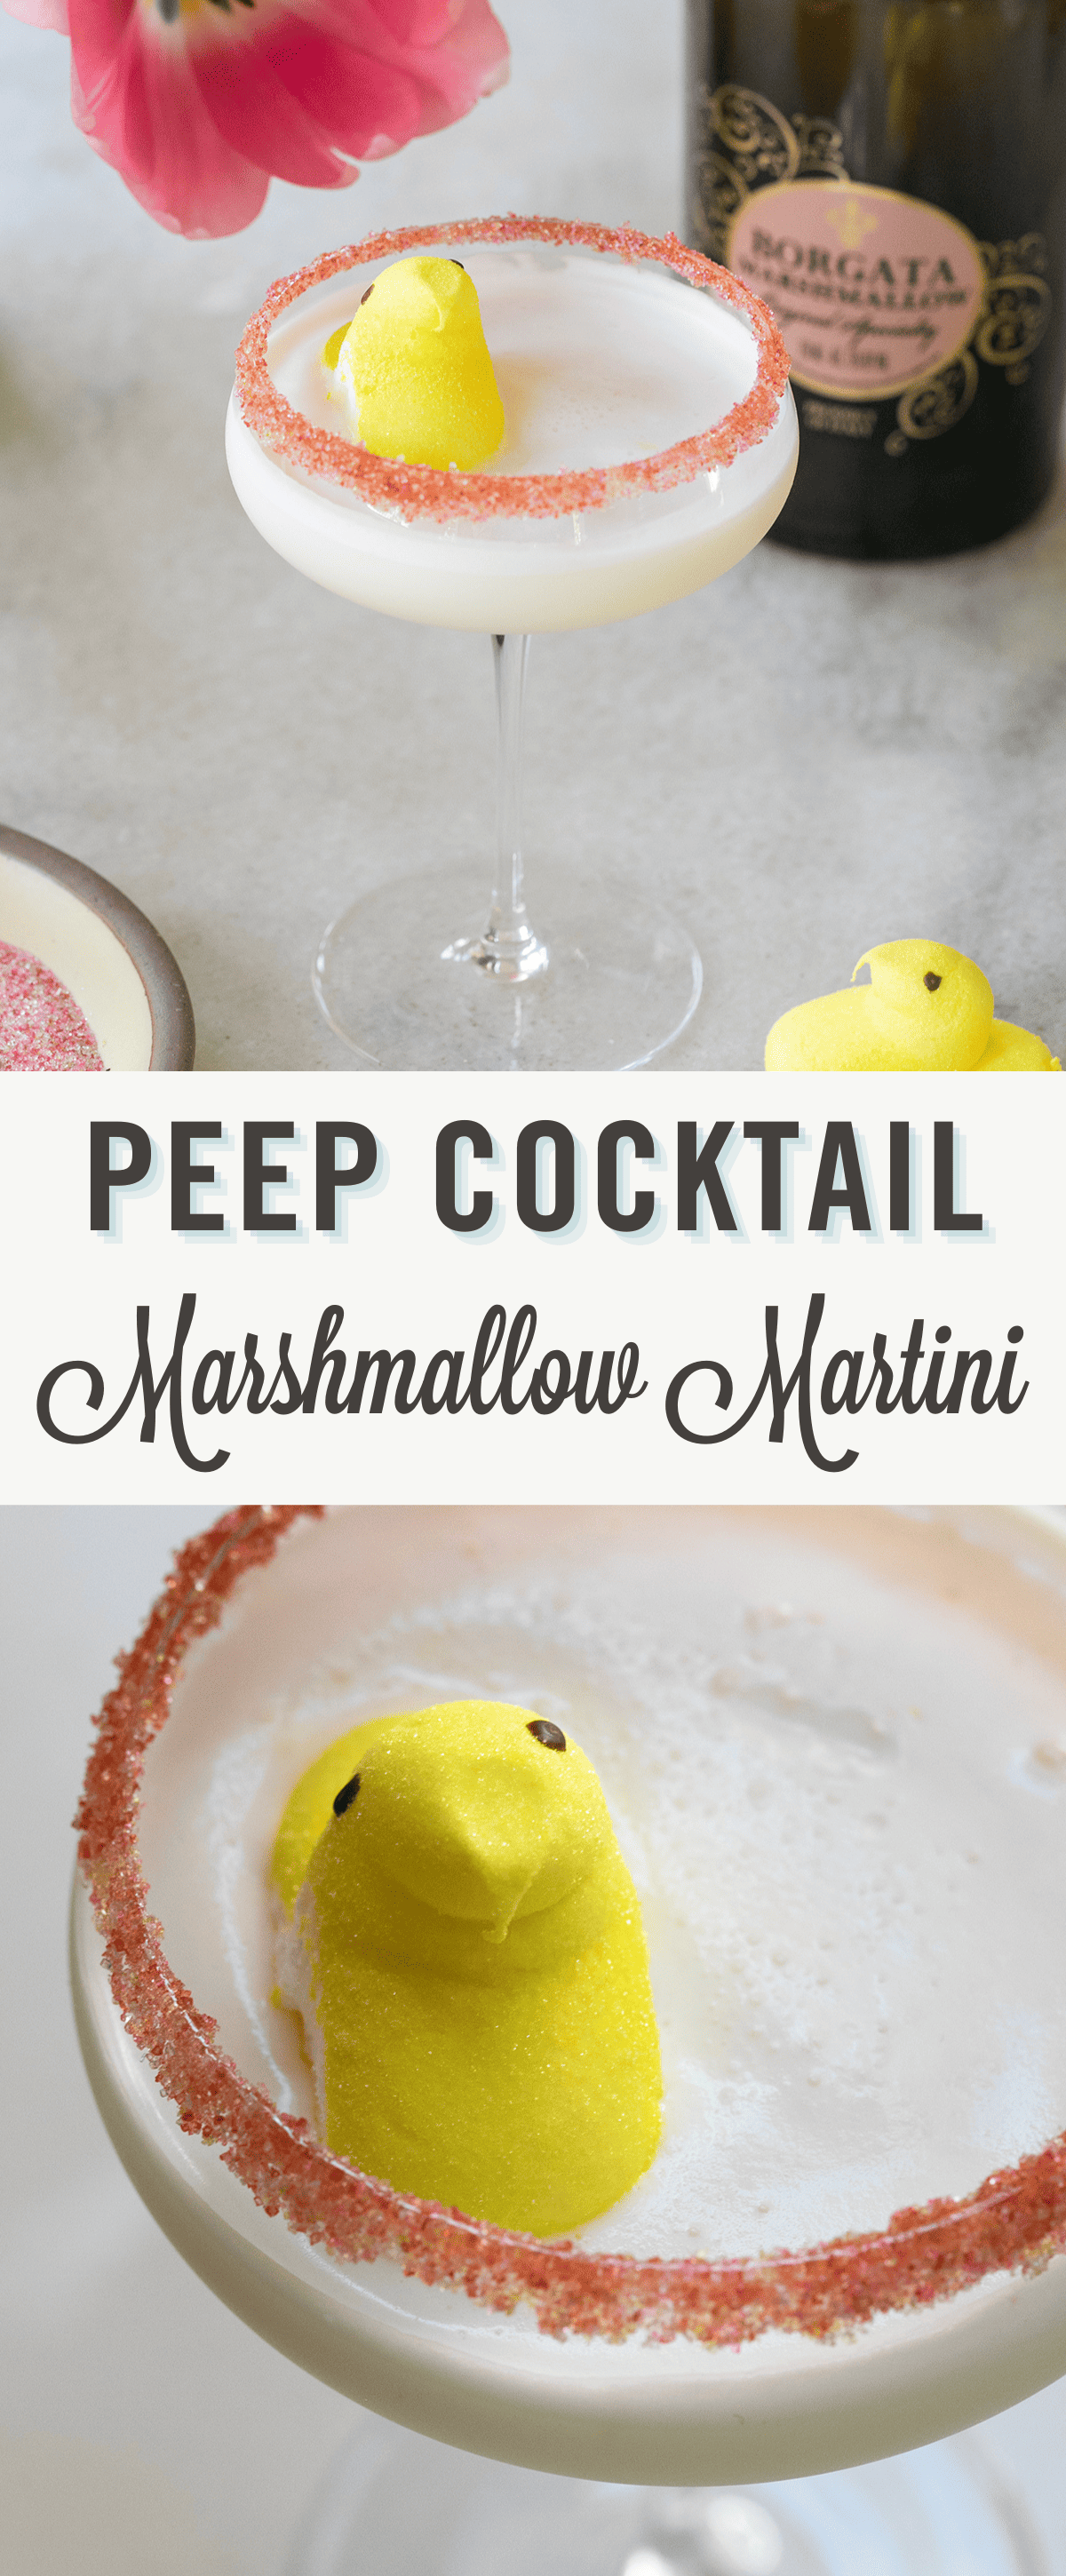 Peep cocktail recipe with marshmallow vodka and heavy cream.